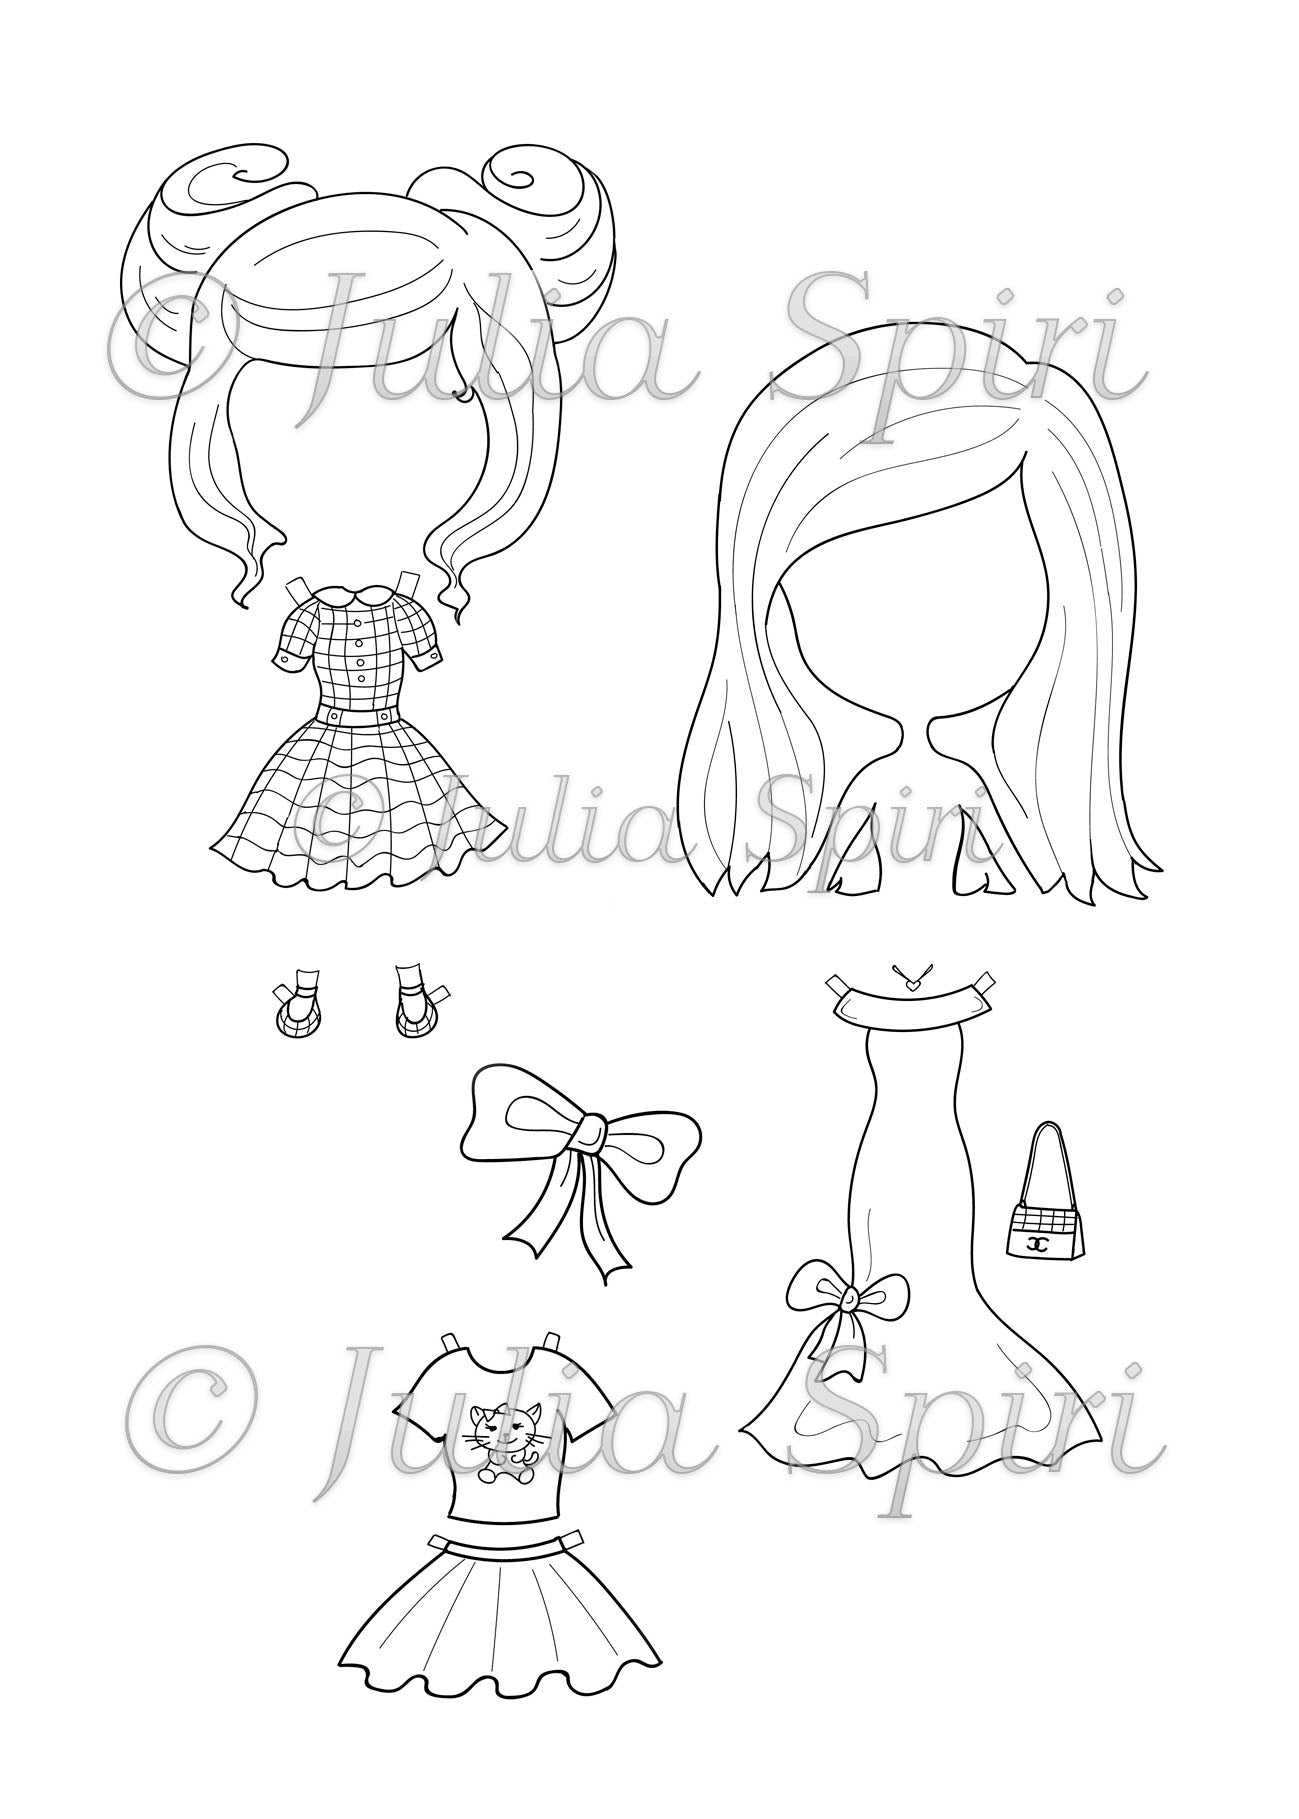 Coloring page dresses clothes for cut crafting paper doll samantha â the art of julia spiri